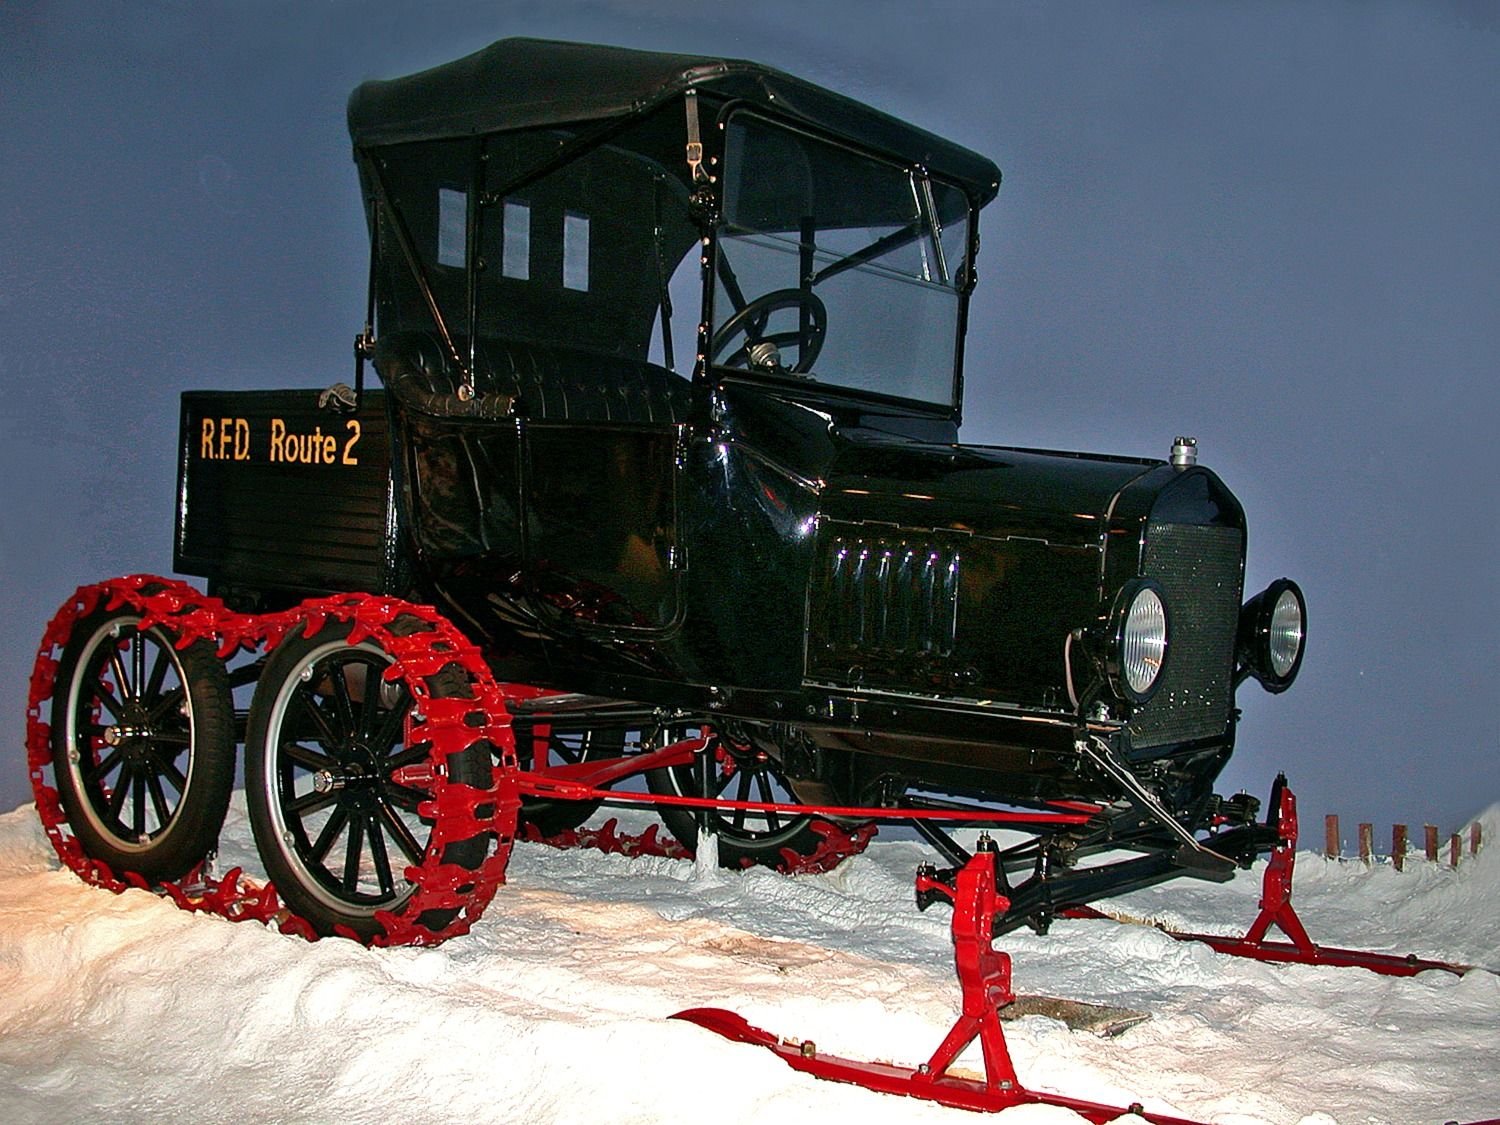 This Is How A Ford Model T Became The World's First Snowmobile